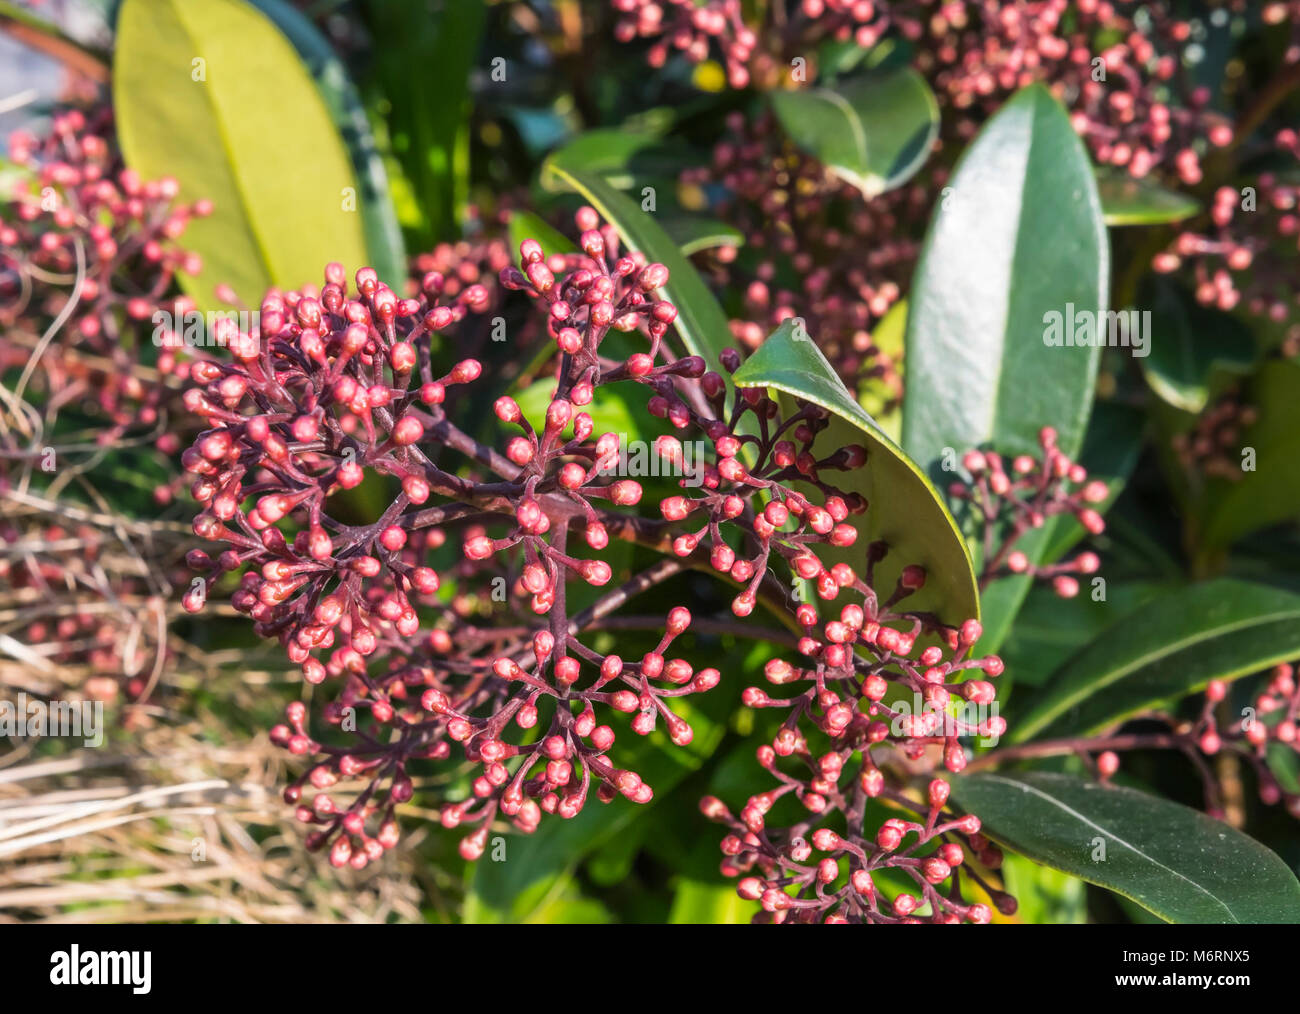 Skimmia japonica 'Rubella' shrub (Japanese skimmia) growing in Winter in the UK. Stock Photo